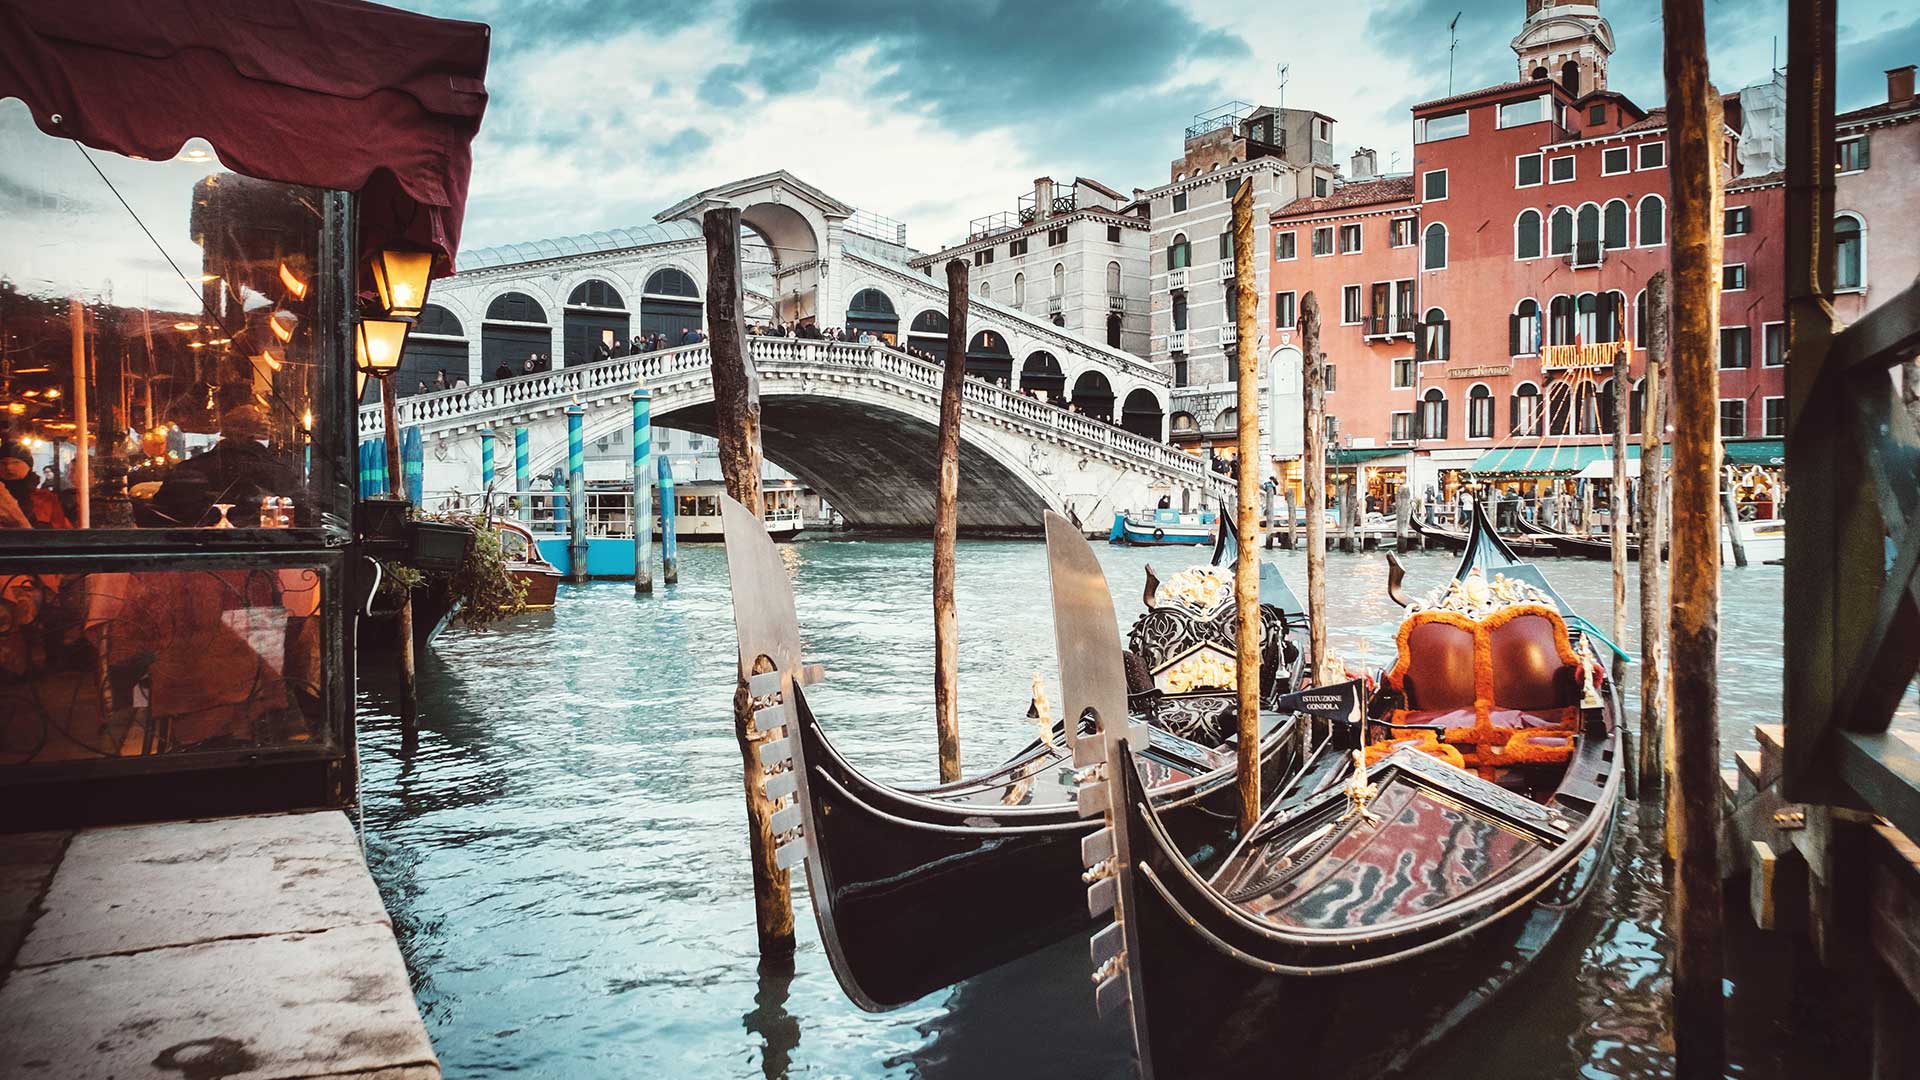 Stop Everything and See If You Can Ace This 24-Question General Knowledge Quiz Rialto Bridge at Grand Canal, Venice, Italy